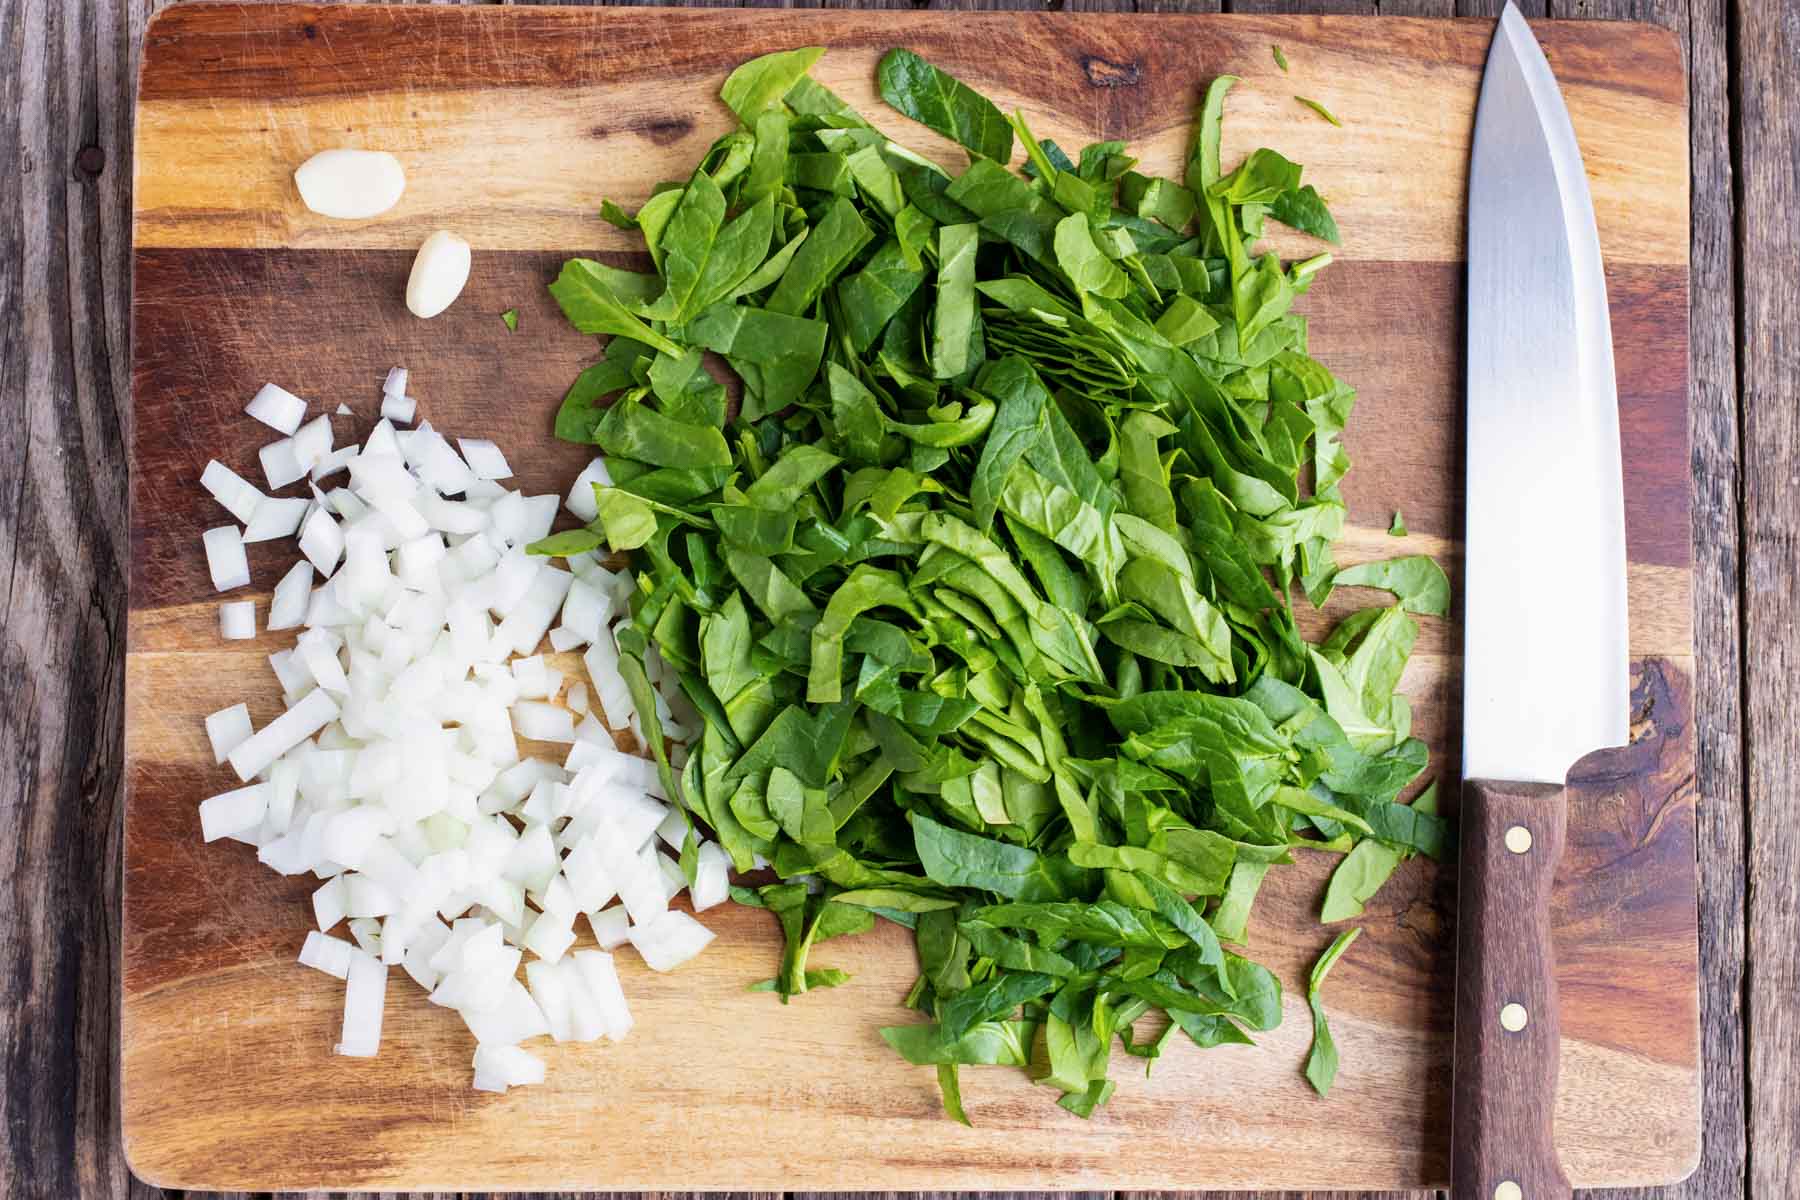 Finely chopped fresh spinach and diced onion to go into a spinach crustless quiche recipe.